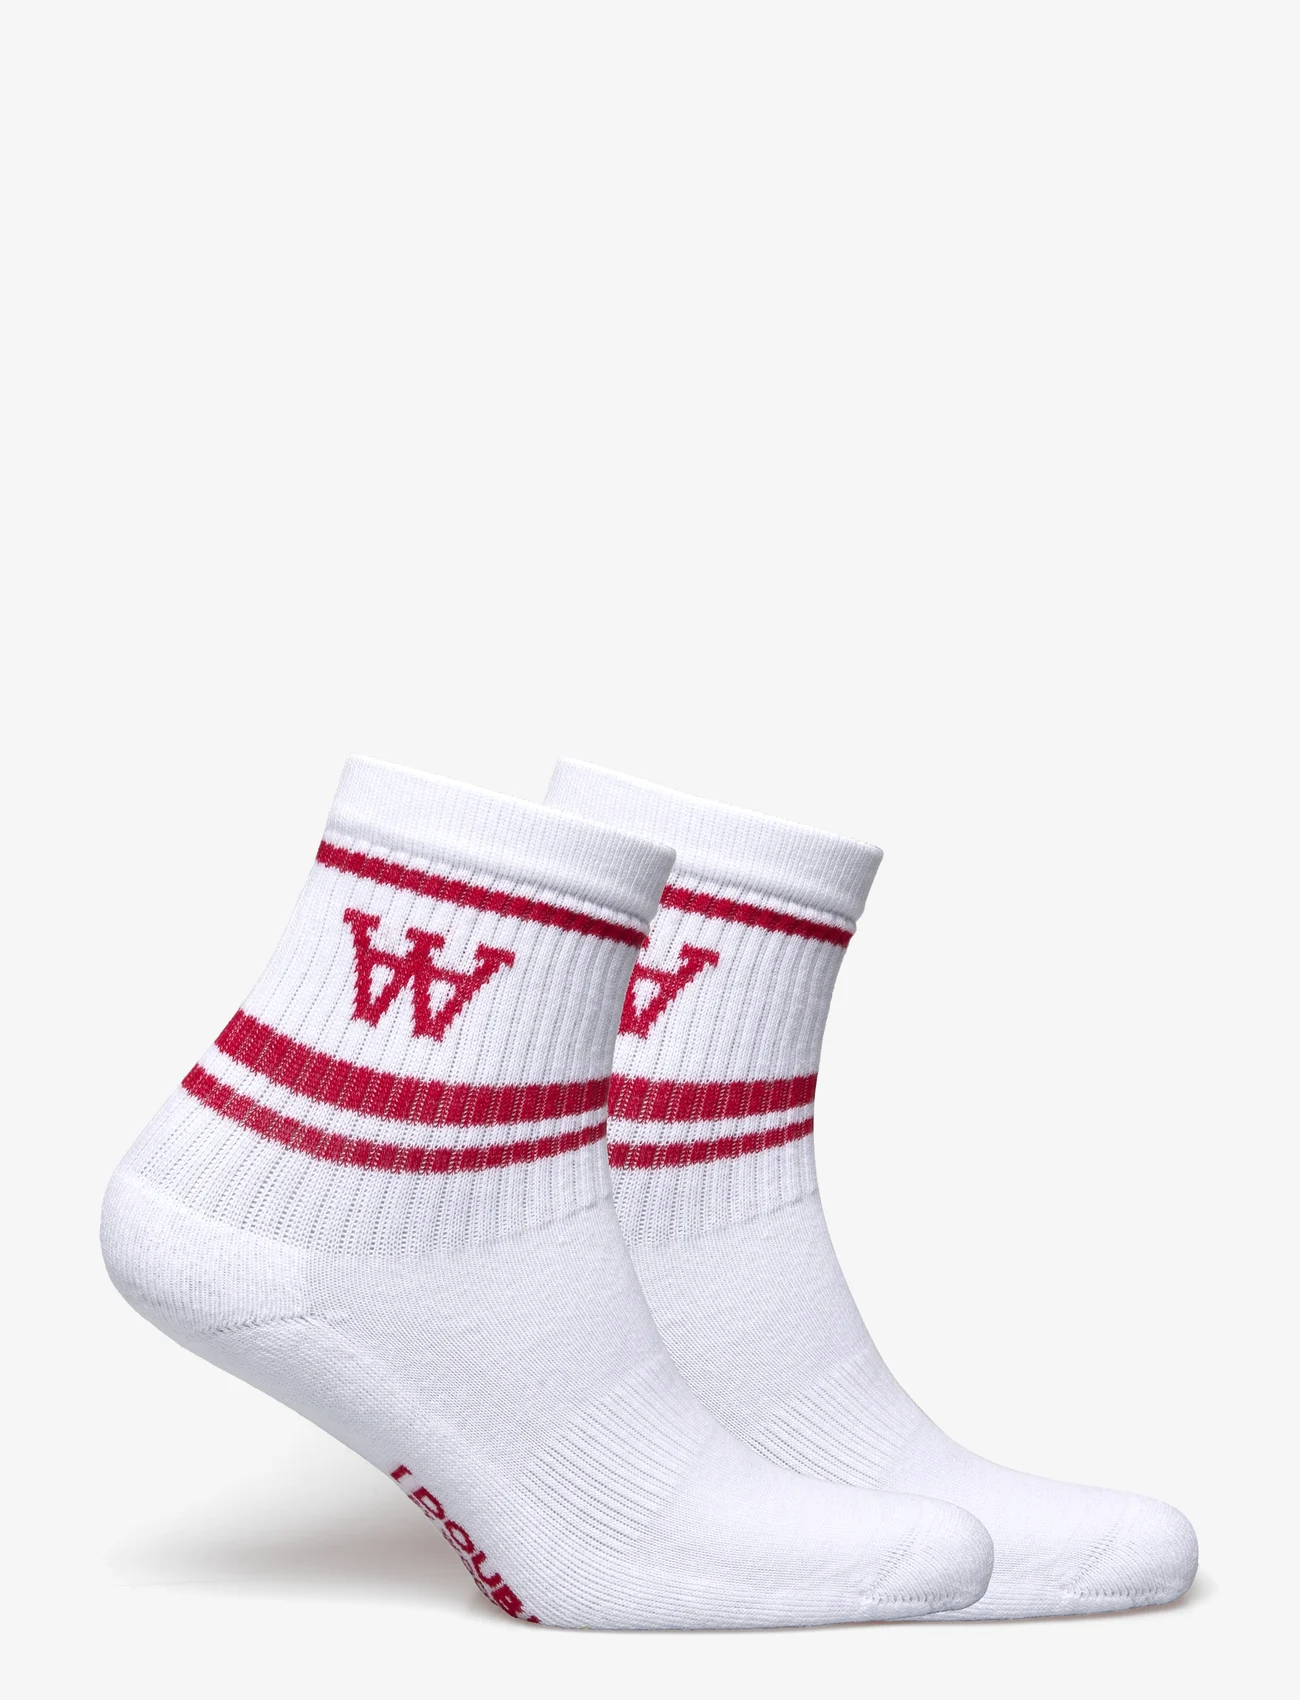 Wood Wood - Kids con 2-pack socks - lowest prices - white/red - 1